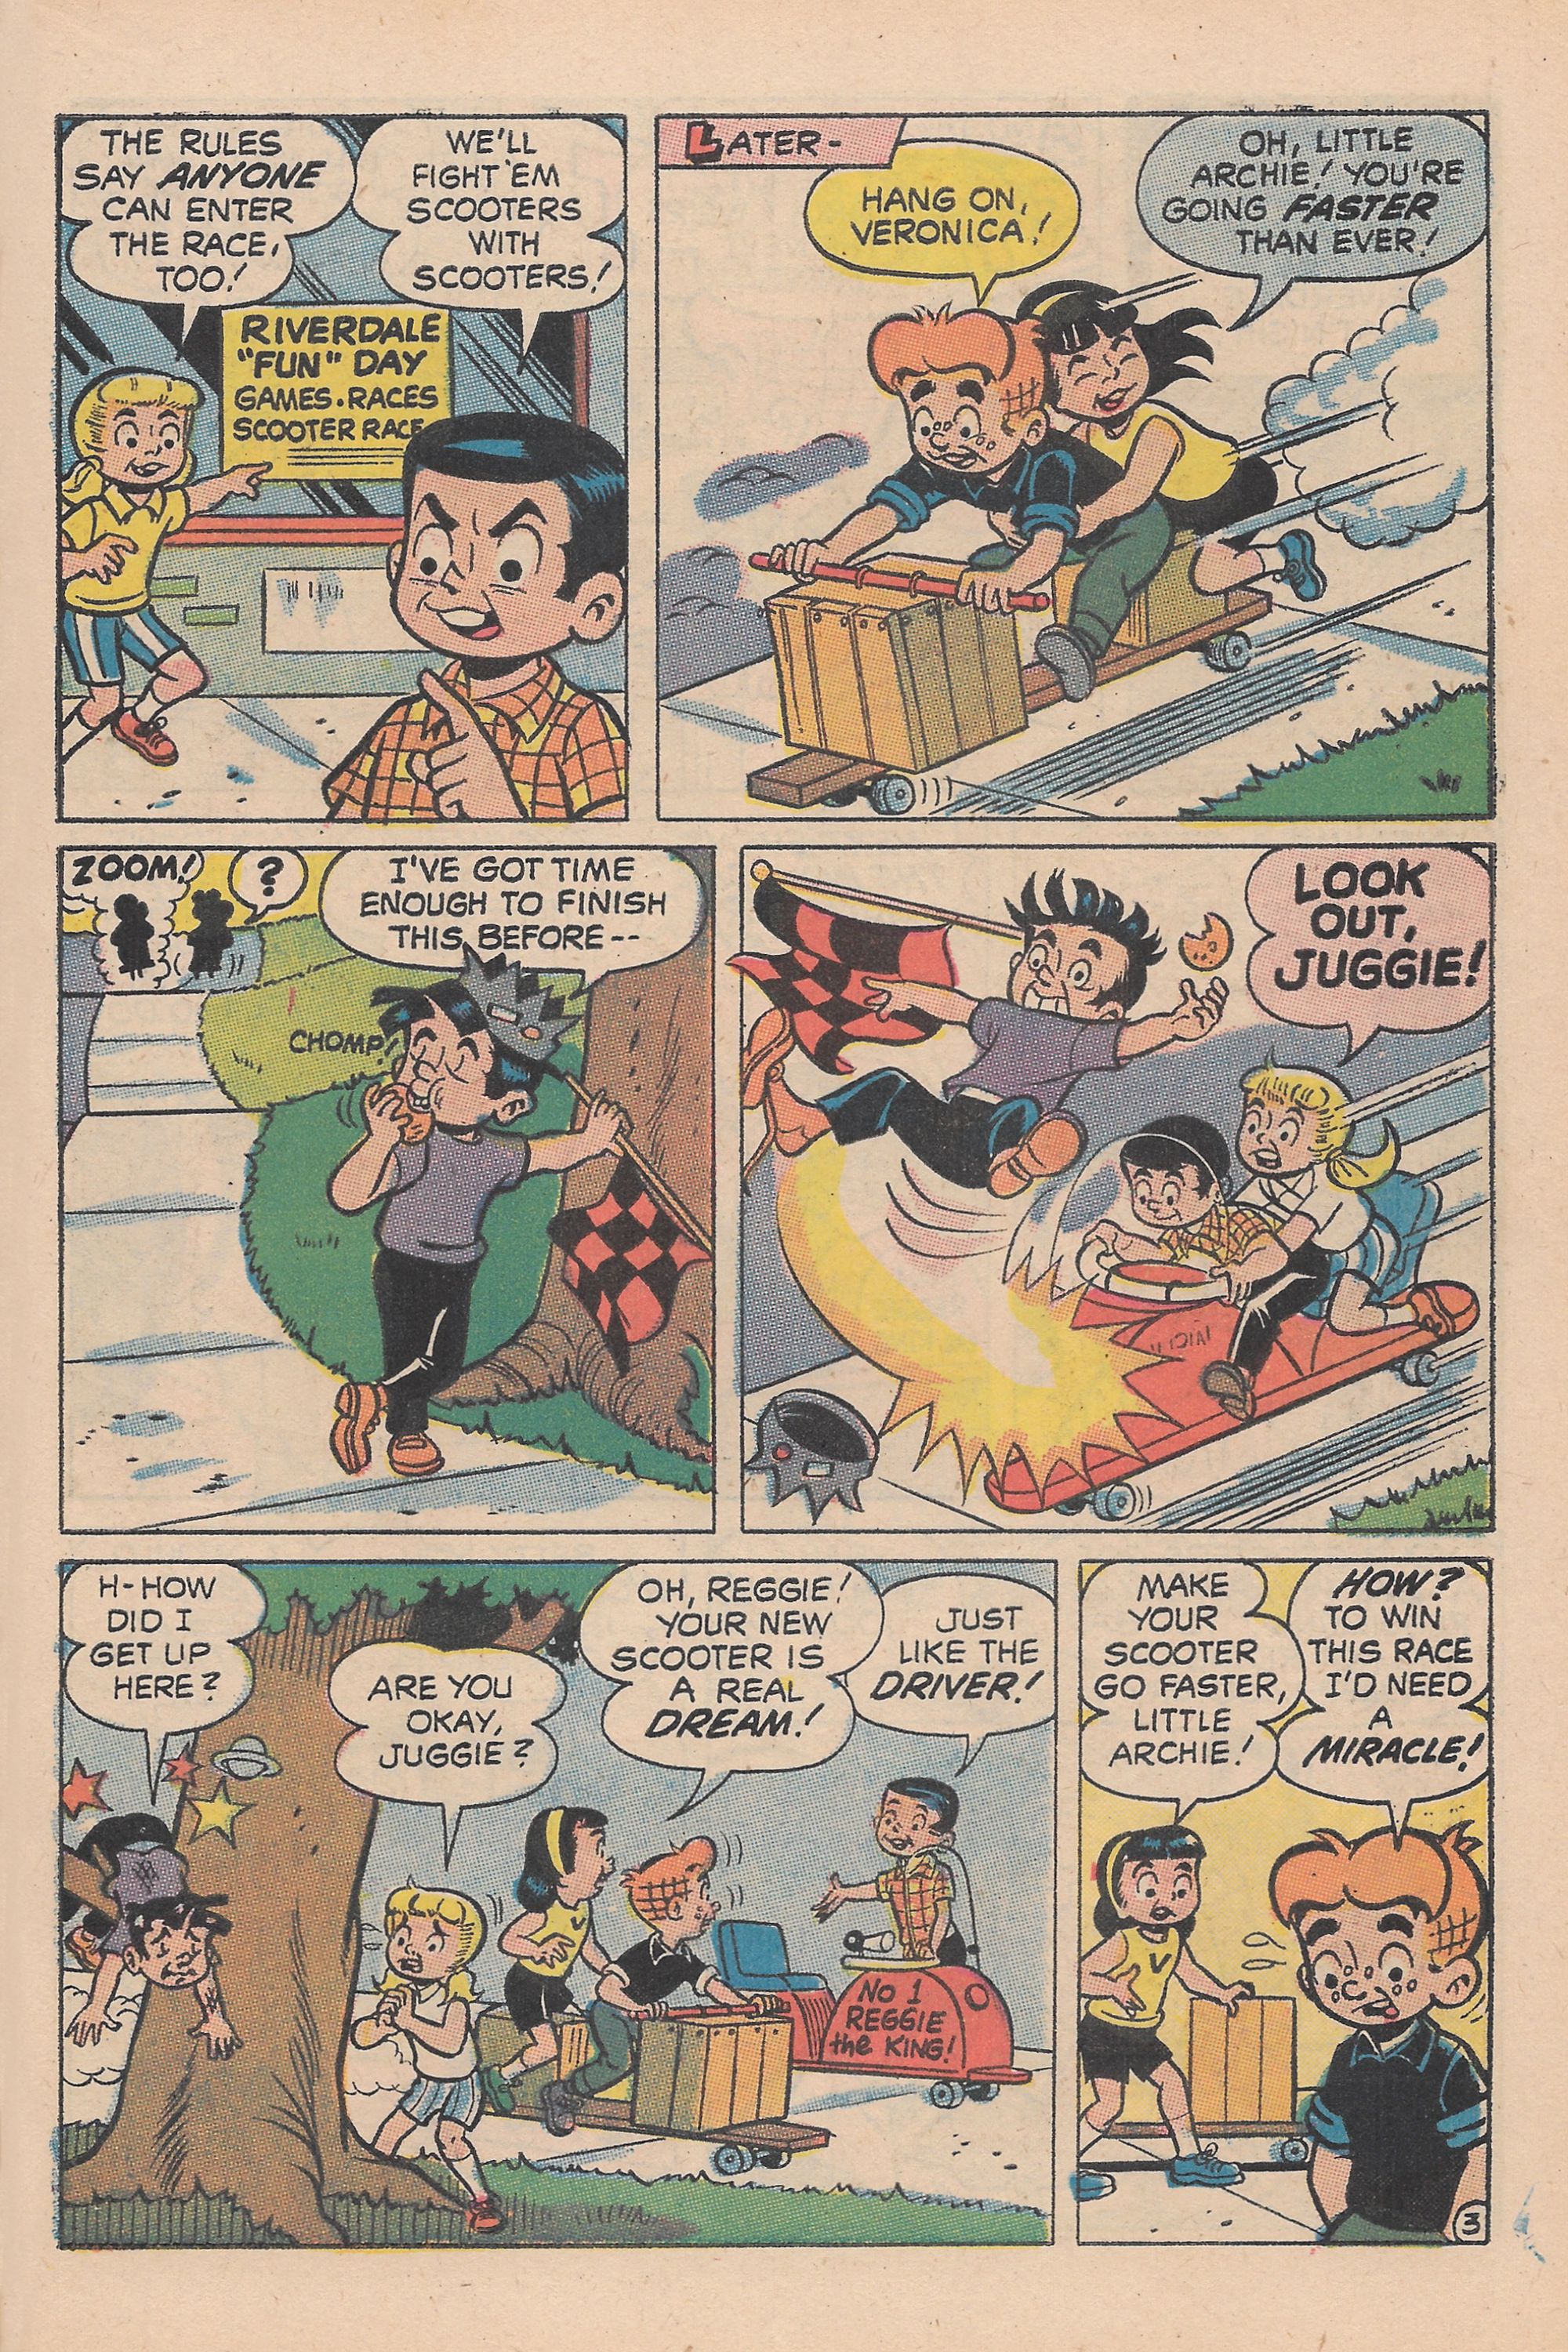 Read online The Adventures of Little Archie comic -  Issue #55 - 53